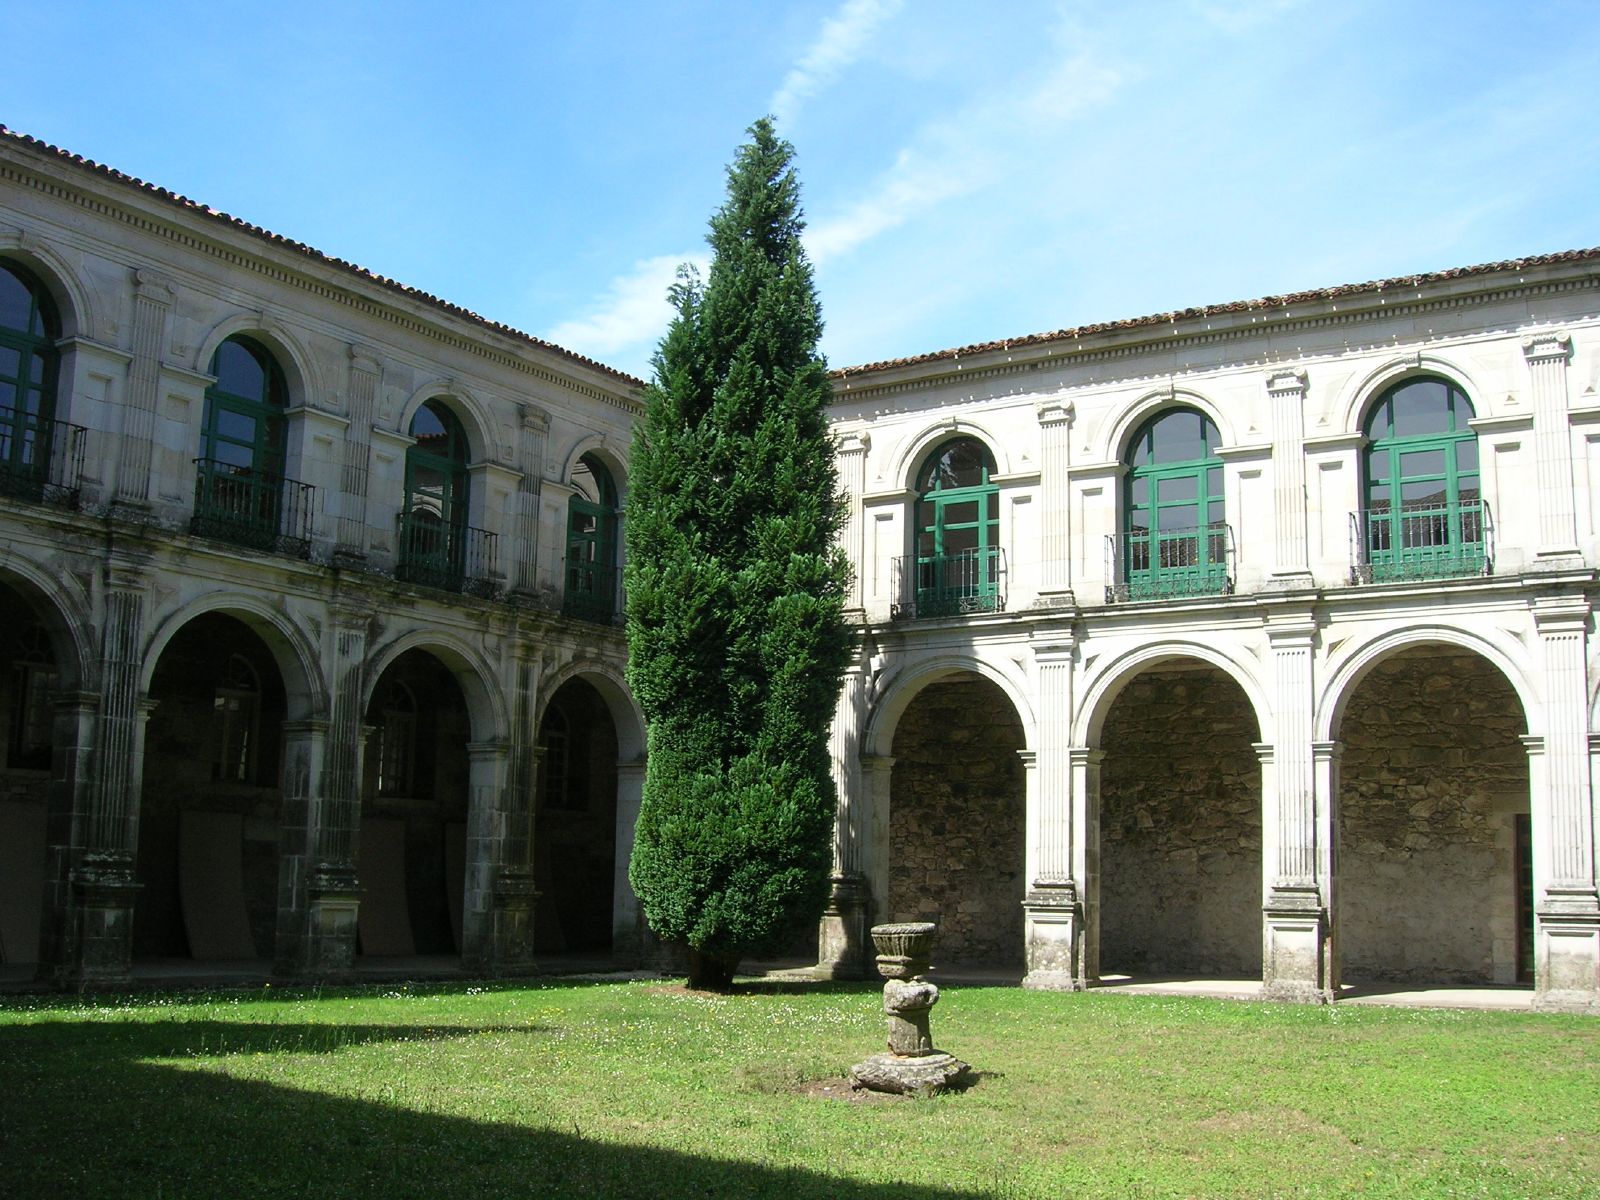 a large courtyard with many arches and pillars